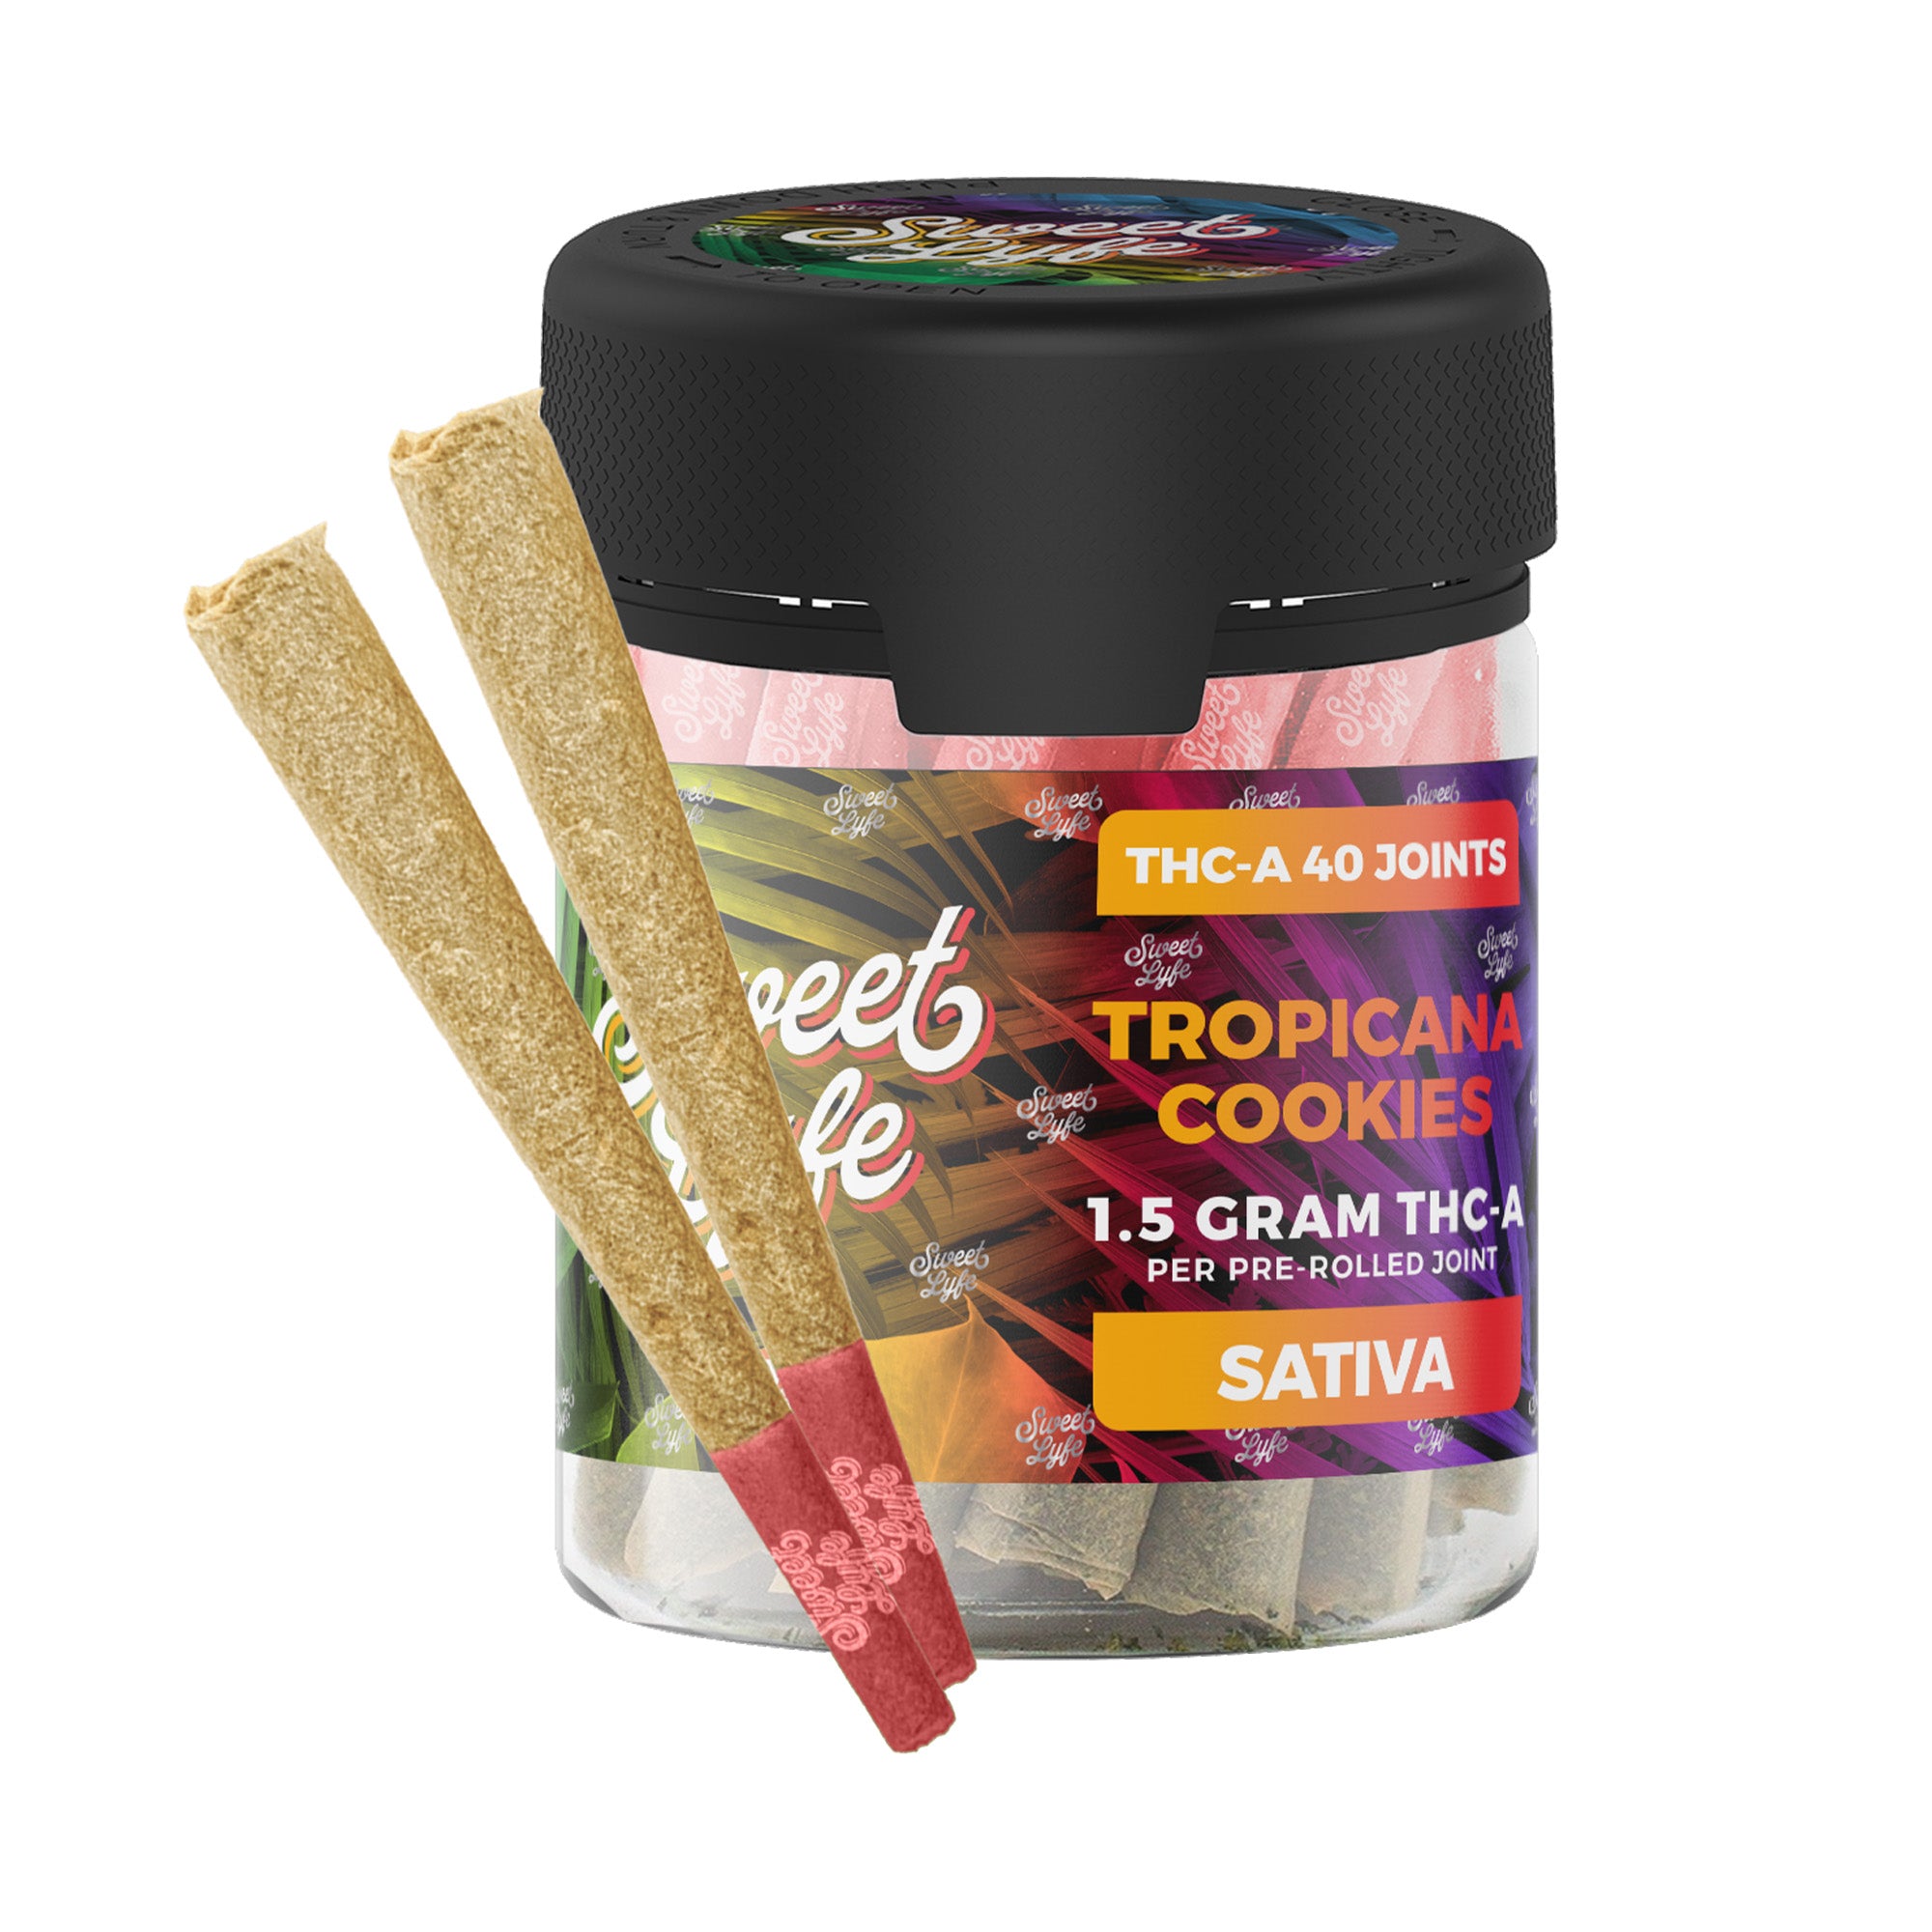 40 Pack of Joints THC-A - 1.5 gram TCH-A Per Joint Tropicana Cookies - Sativa